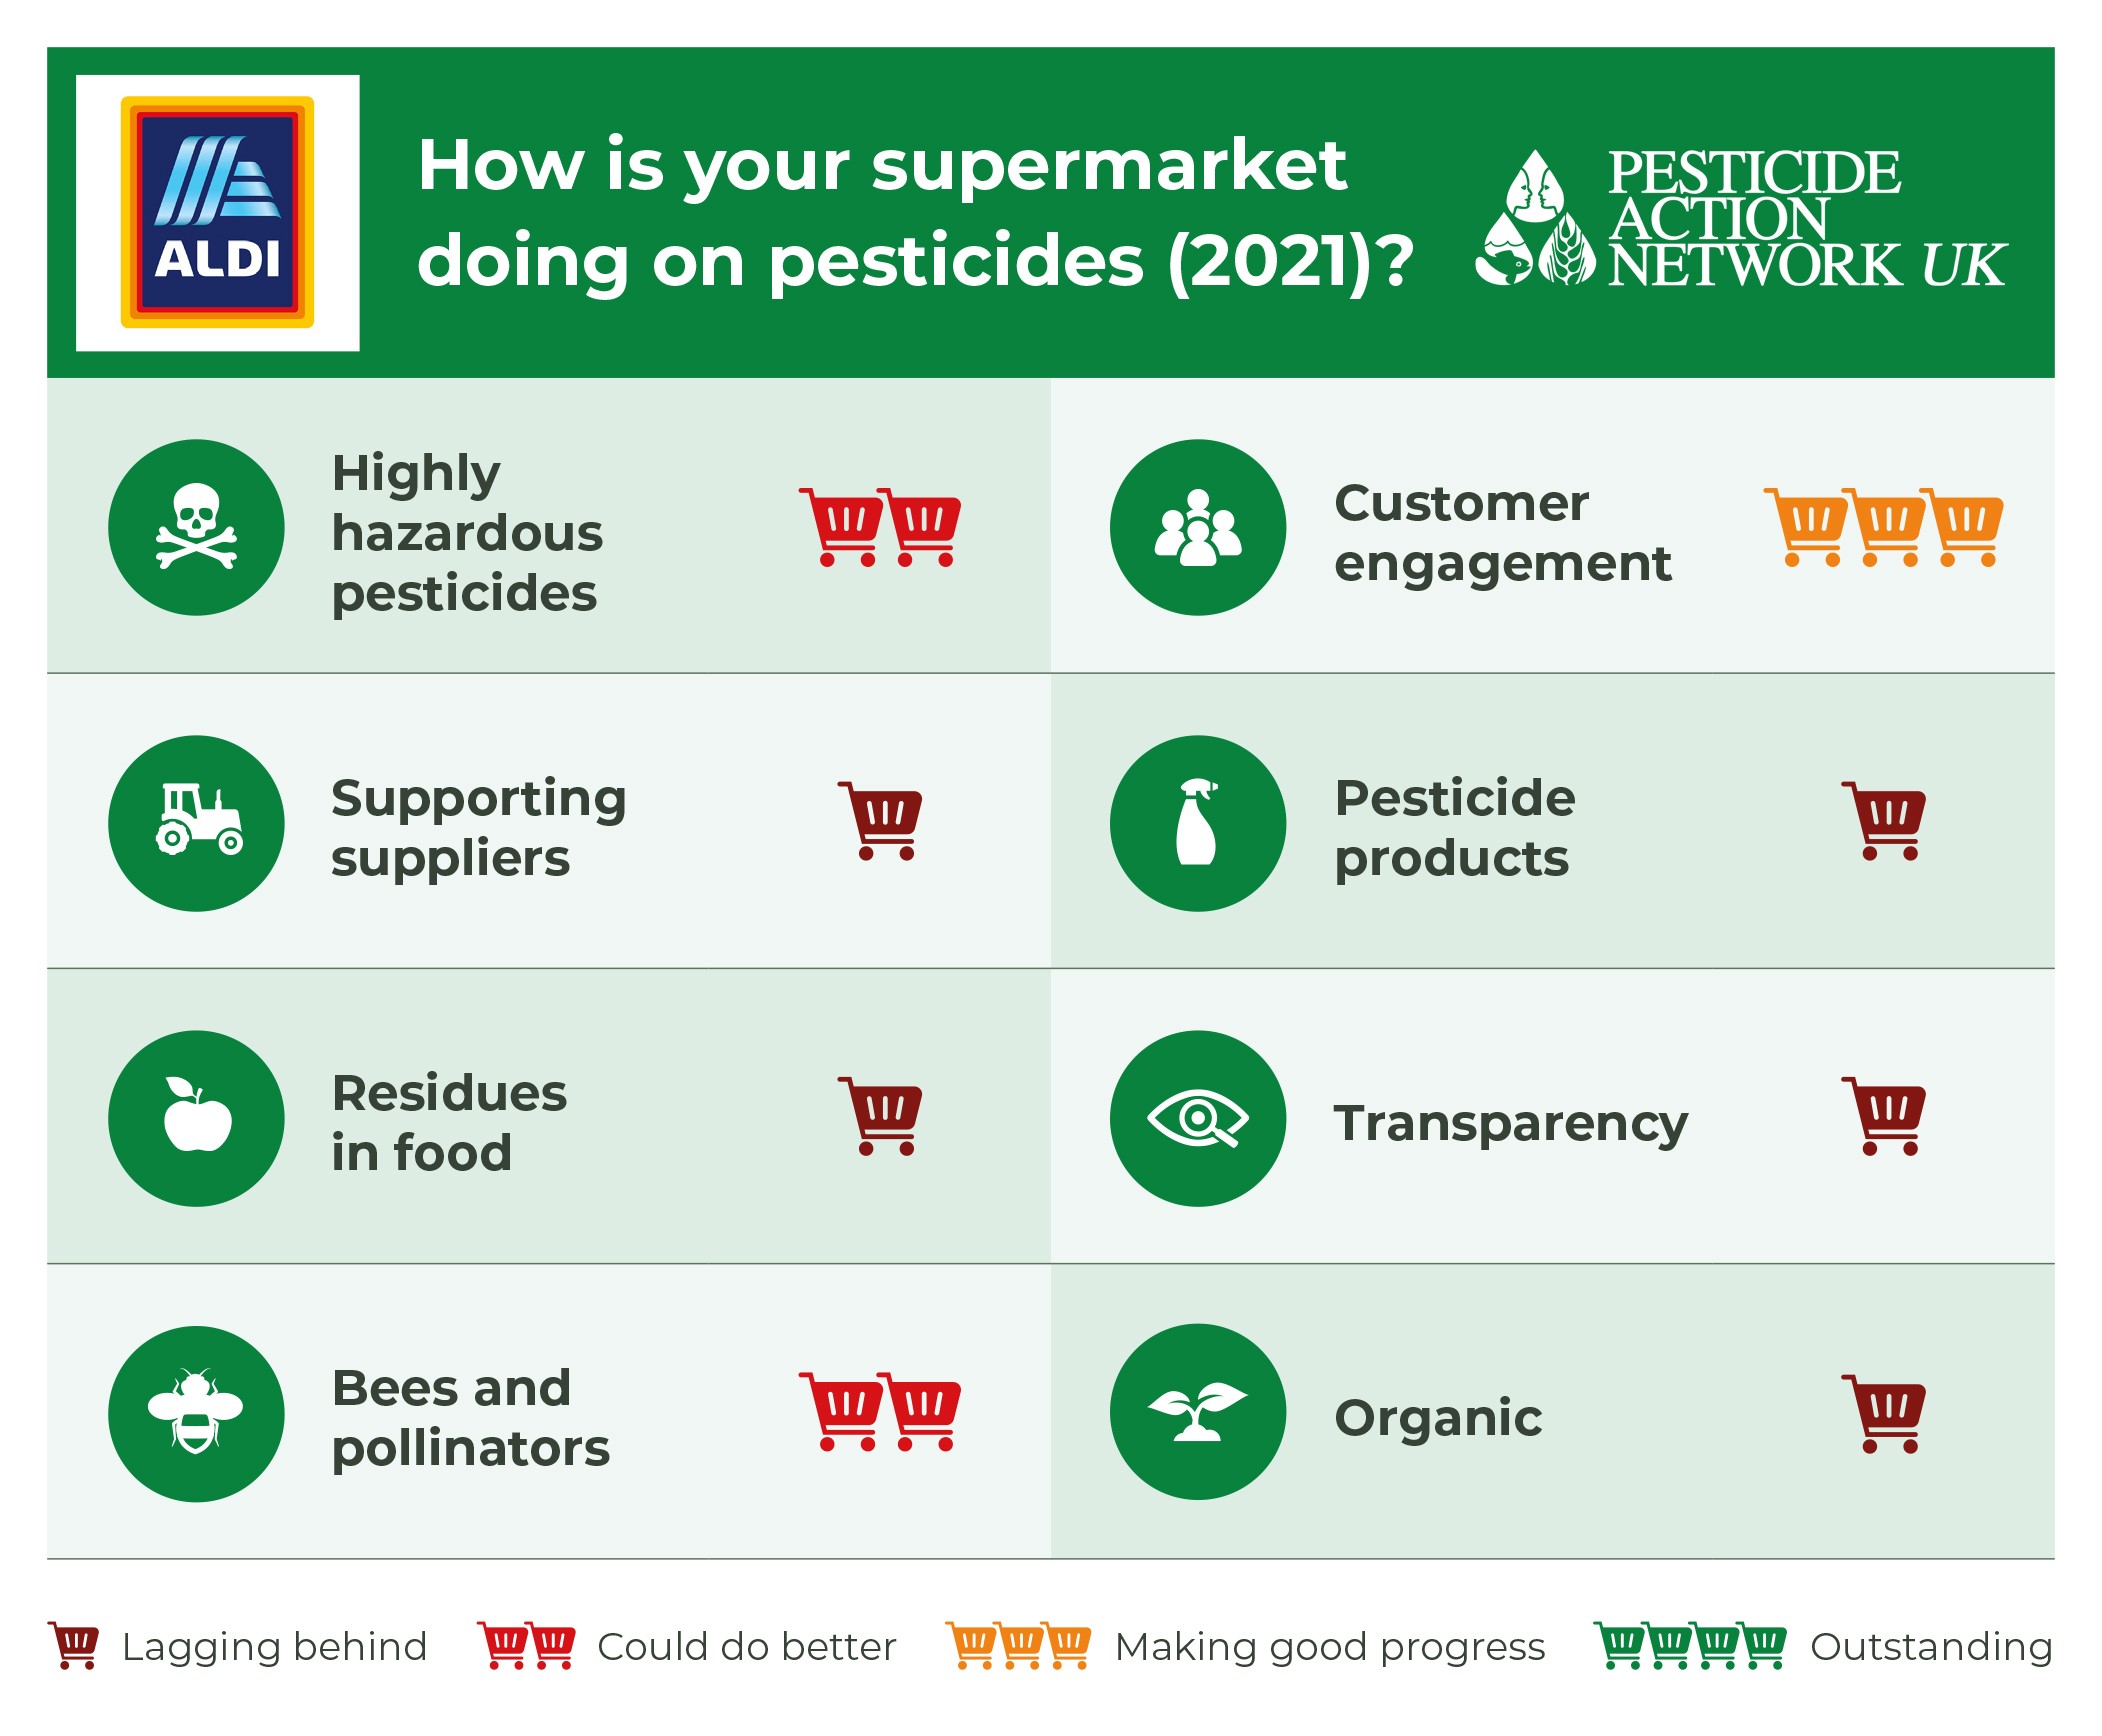 How is Aldi doing on pesticides?